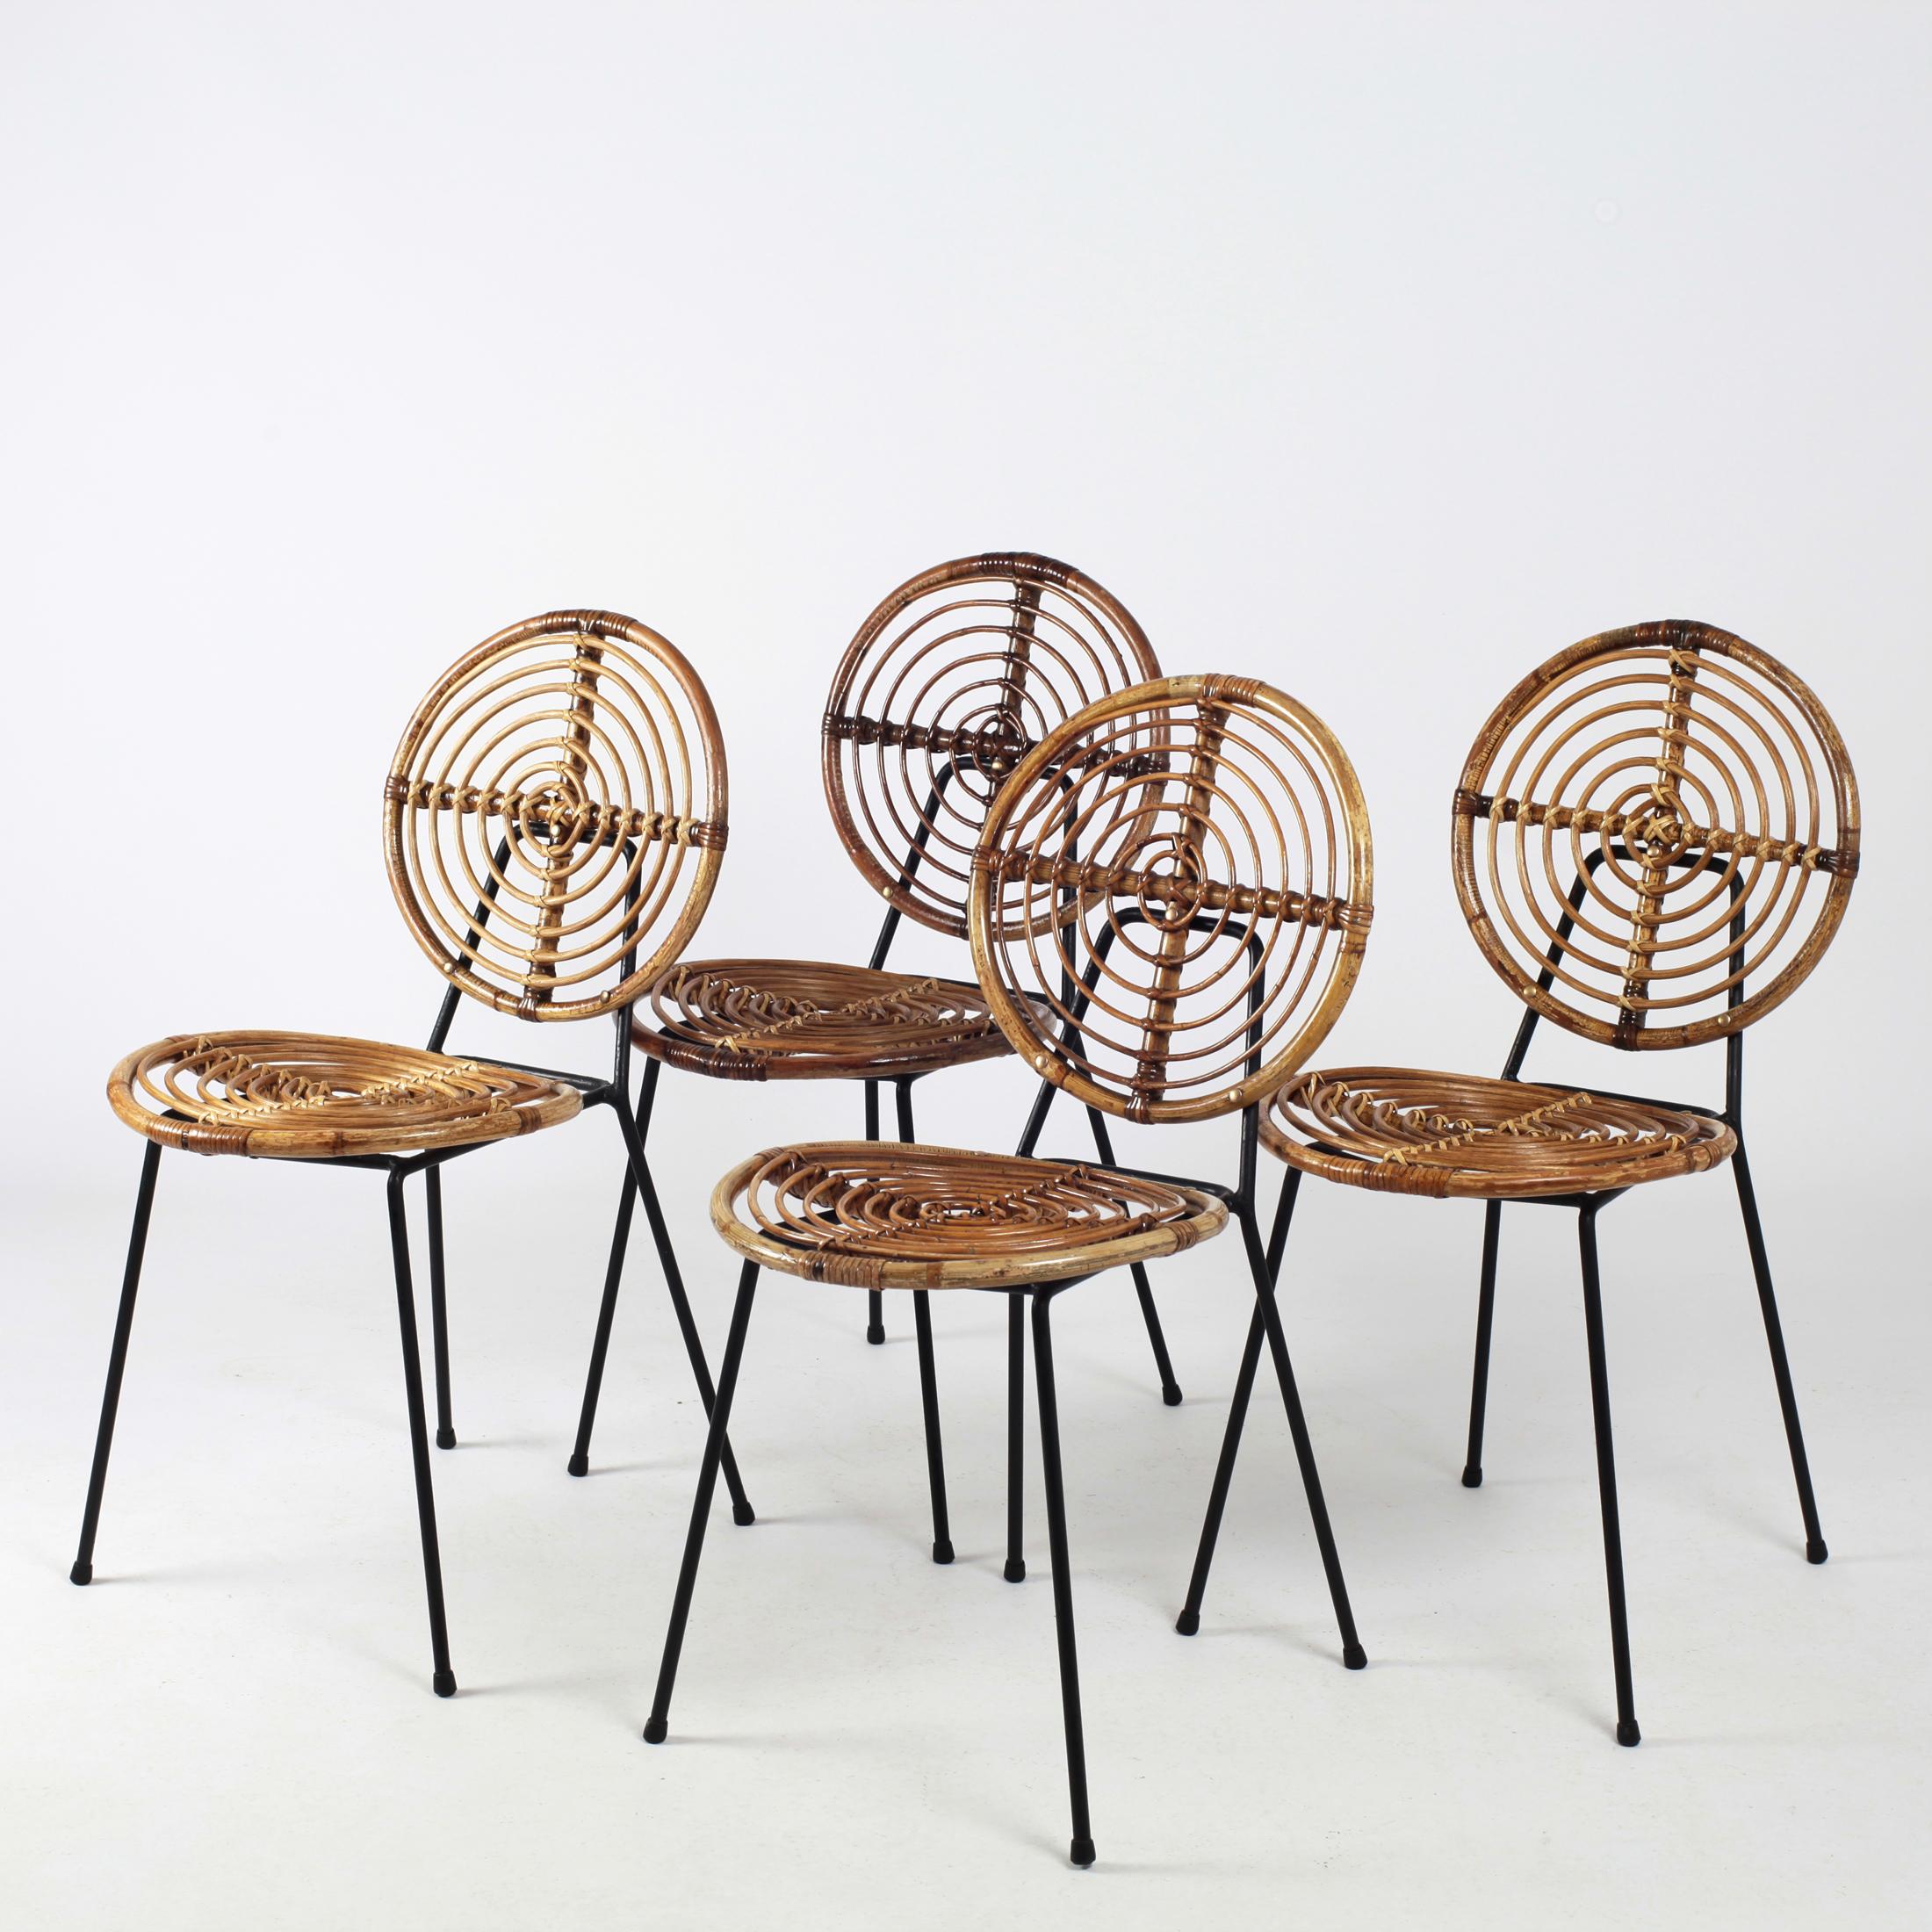 These beautiful CM 166 Thonet rattan chairs came from the 1950s.
Seat and back in concentric circle shape with brass details on solid black metal base.
Very beautiful patina.
Some restaured.
Price per item. 2 chairs available.
Thonet advertising